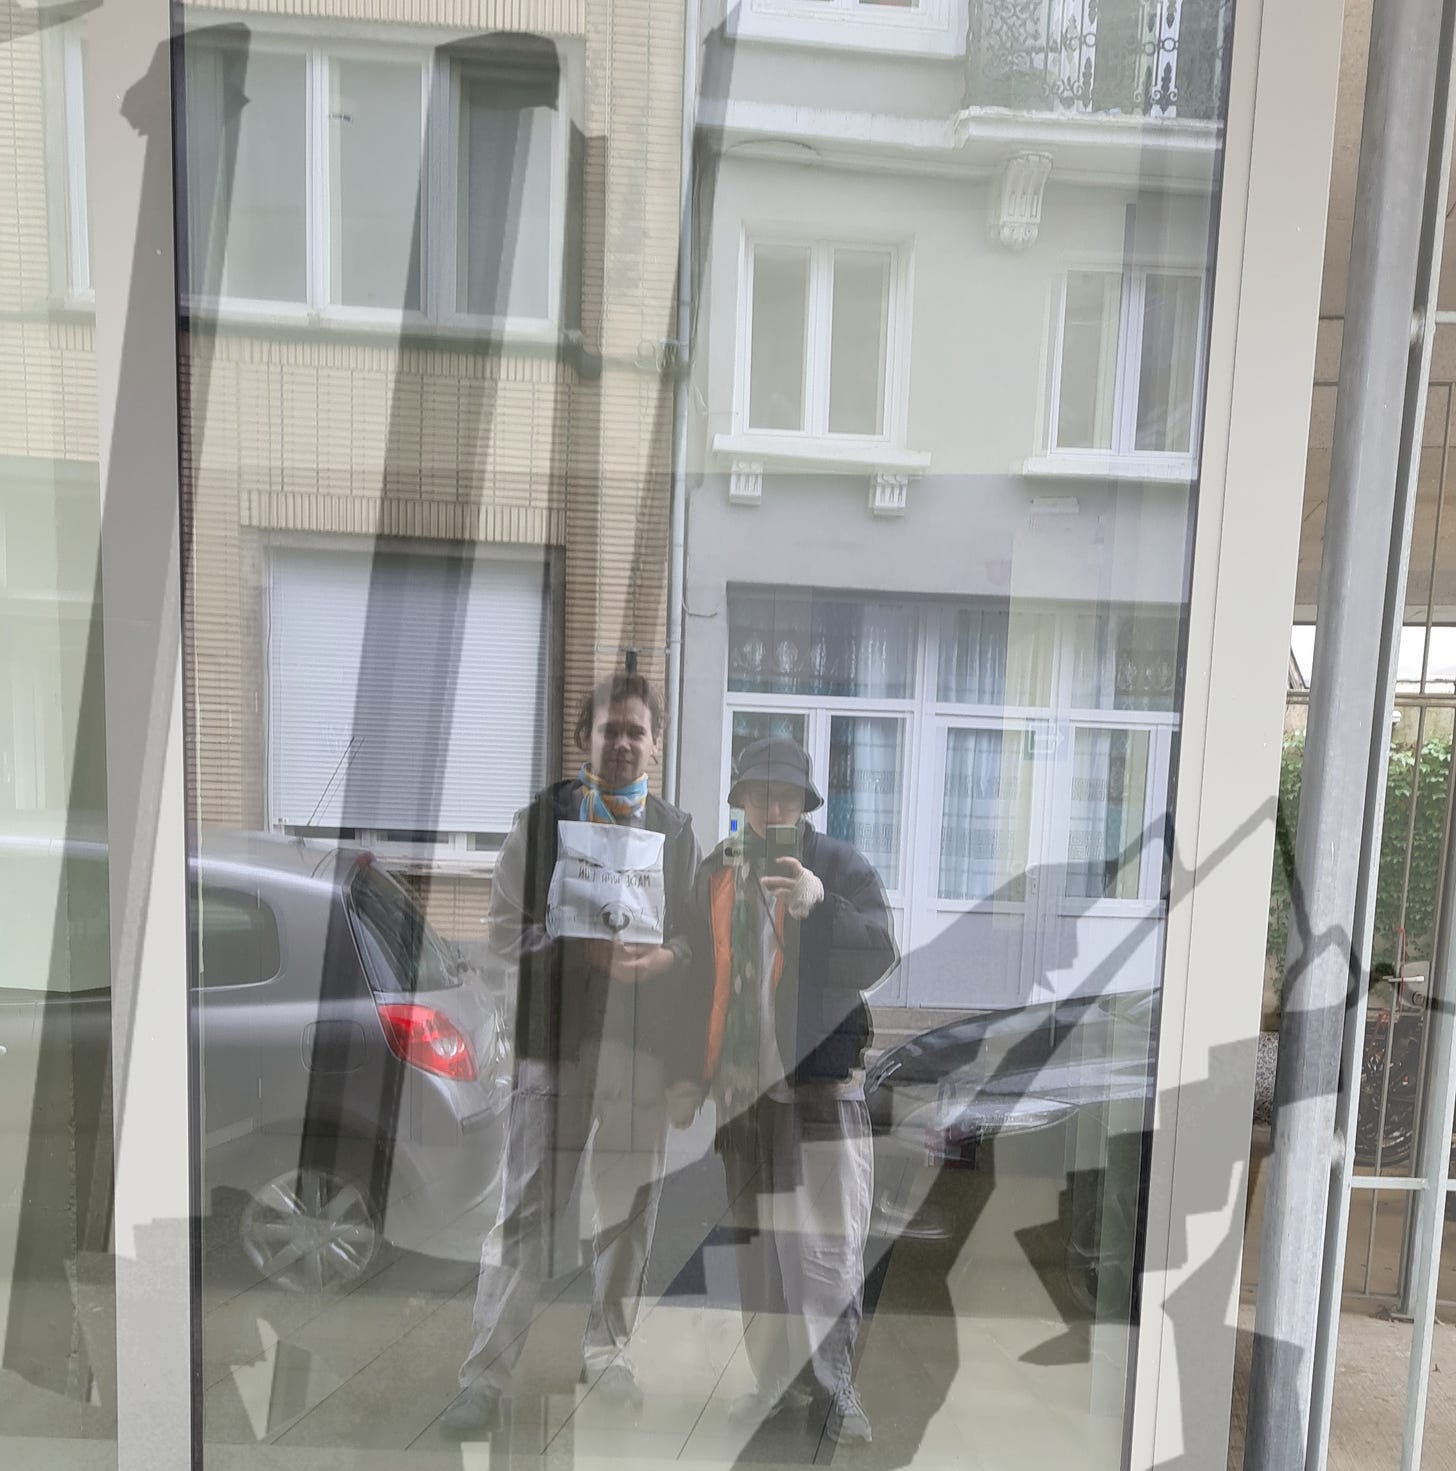 picture of a street window reflection of two people holding a white paper bag, standing between two cars